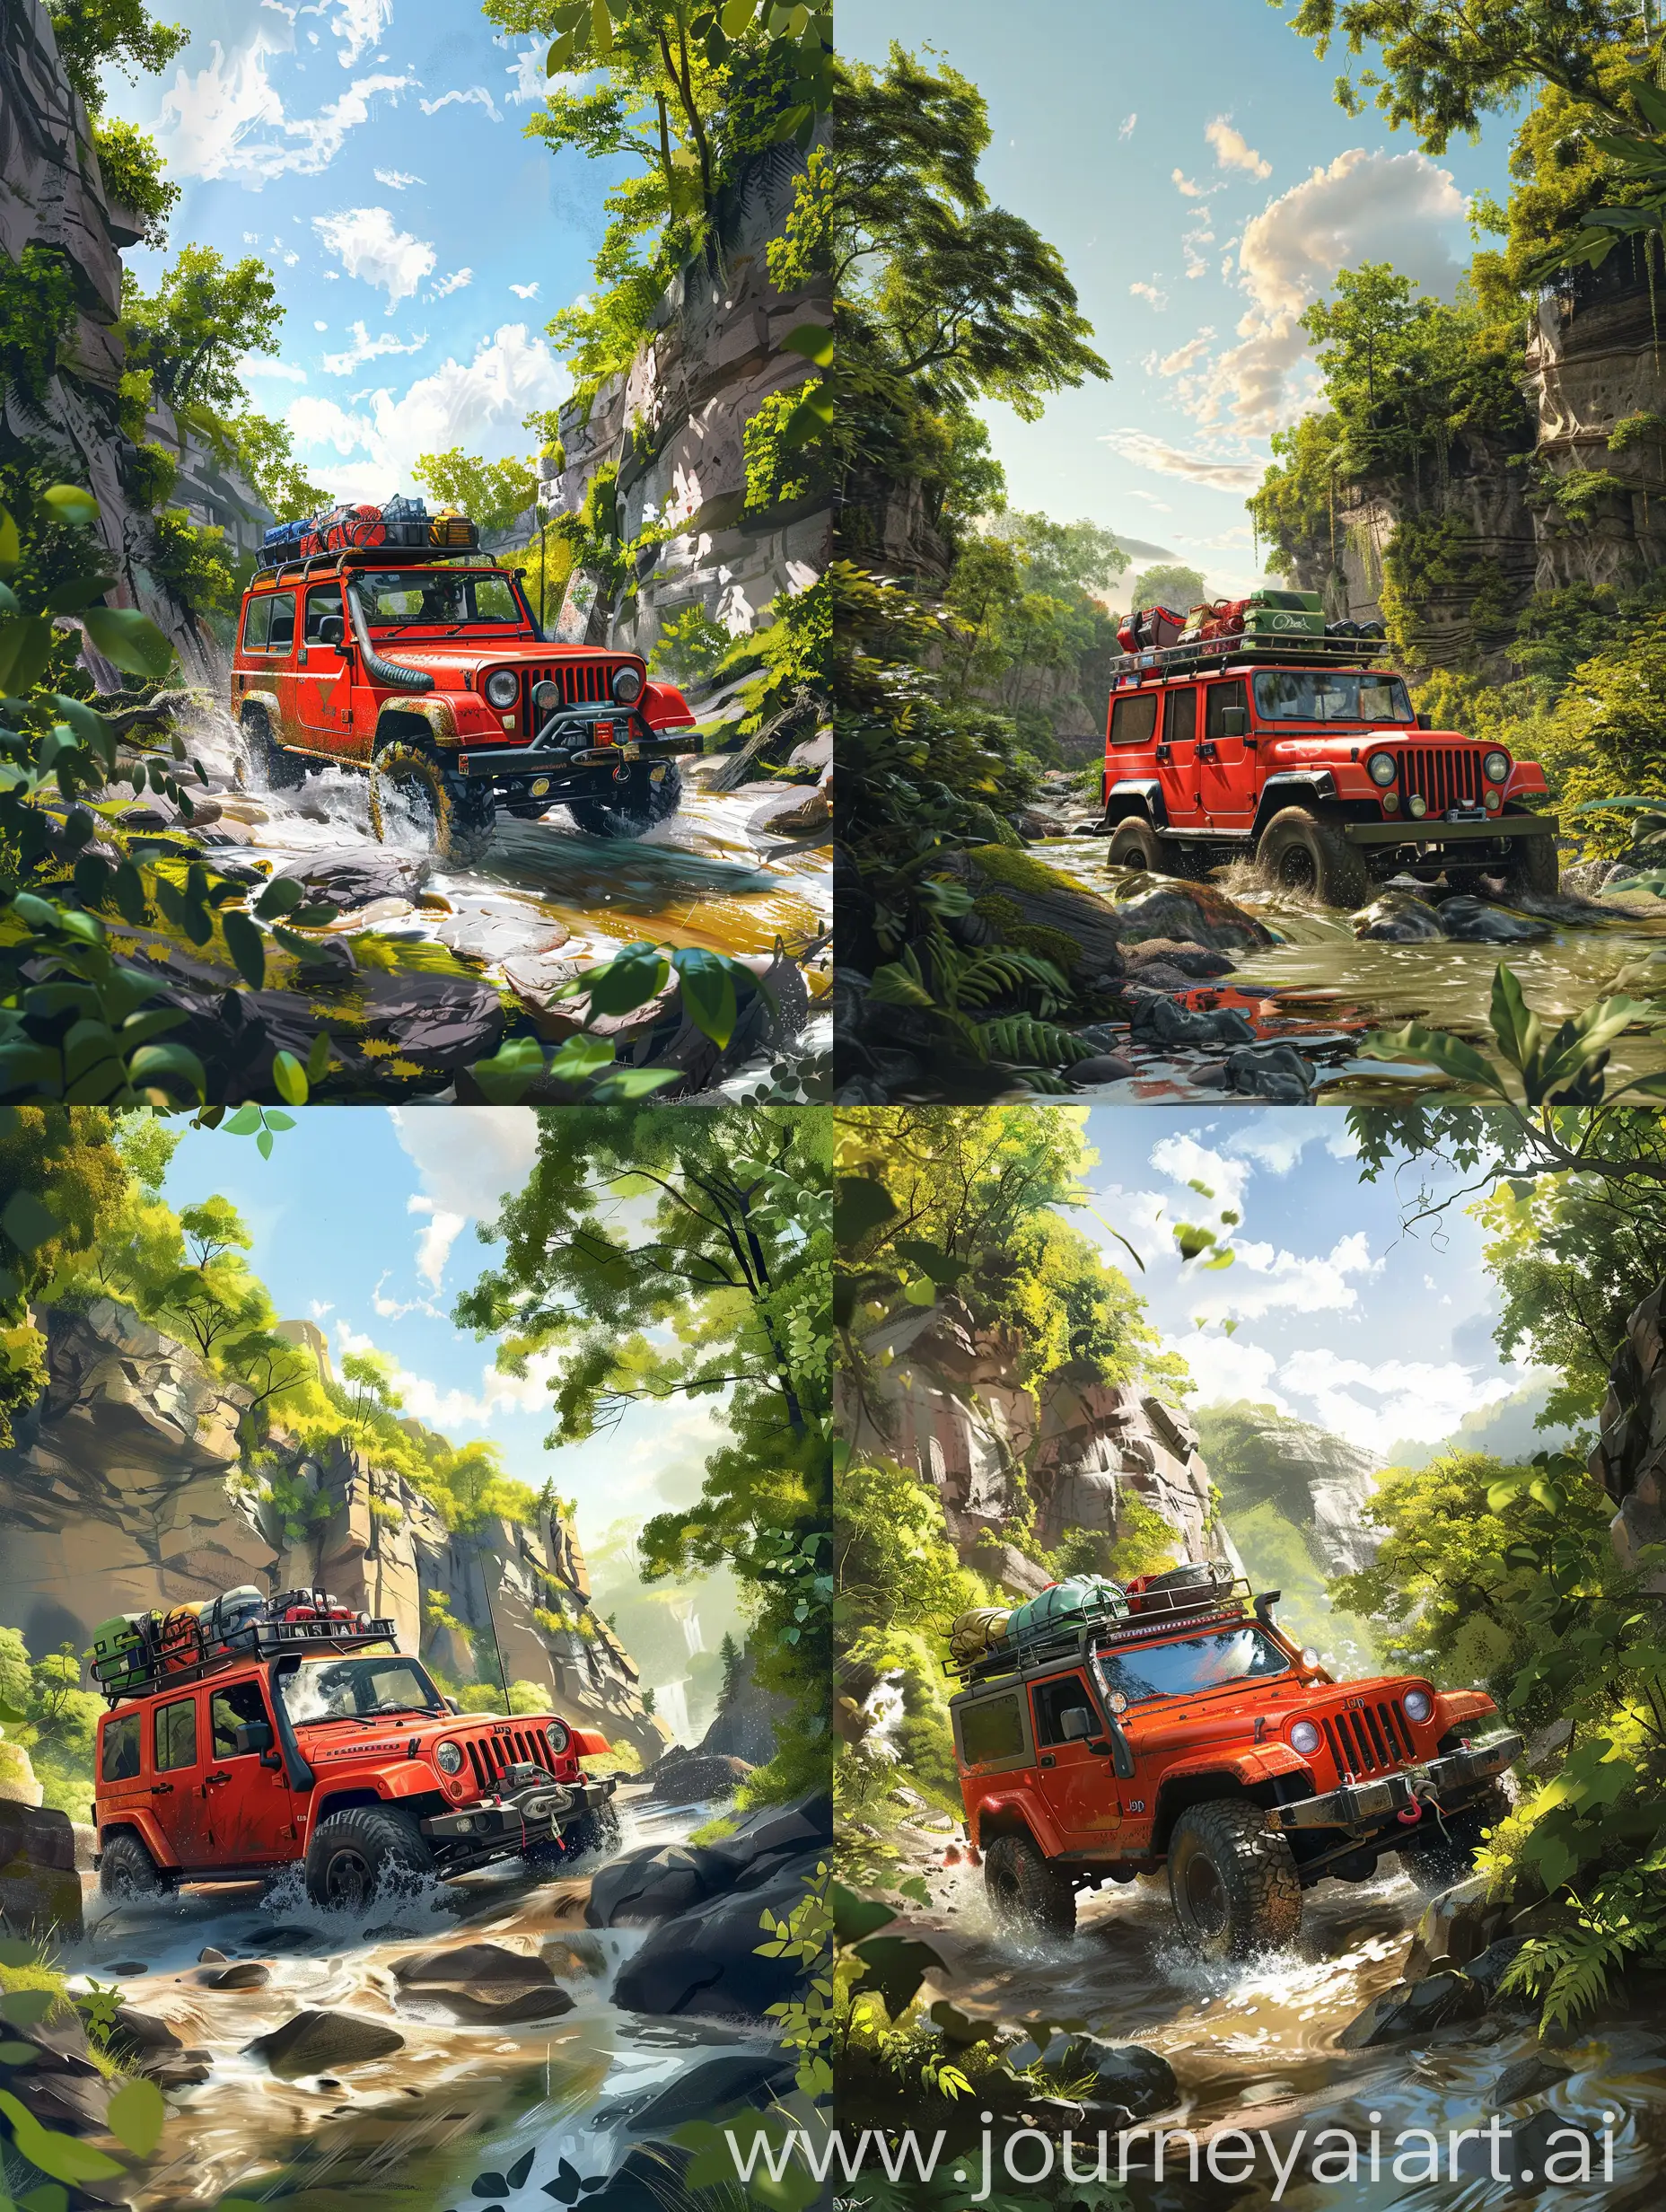 Digital painting of a vibrant red off-road vehicle, likely a Jeep, with a roof rack loaded with equipment. It’s navigating through a rocky stream, surrounded by lush greenery and cliffs, under a clear sky with scattered clouds. This type of photography is typically known as a low angle shot, which gives the impression that the viewer is looking up at the subject from a lower vantage point, emphasizing the vehicle’s imposing presence and the adventurous terrain it’s conquering. The sunlight filtering through the trees adds dynamic contrasts of light and shadow to the scene, enhancing the overall sense of adventure and exploration